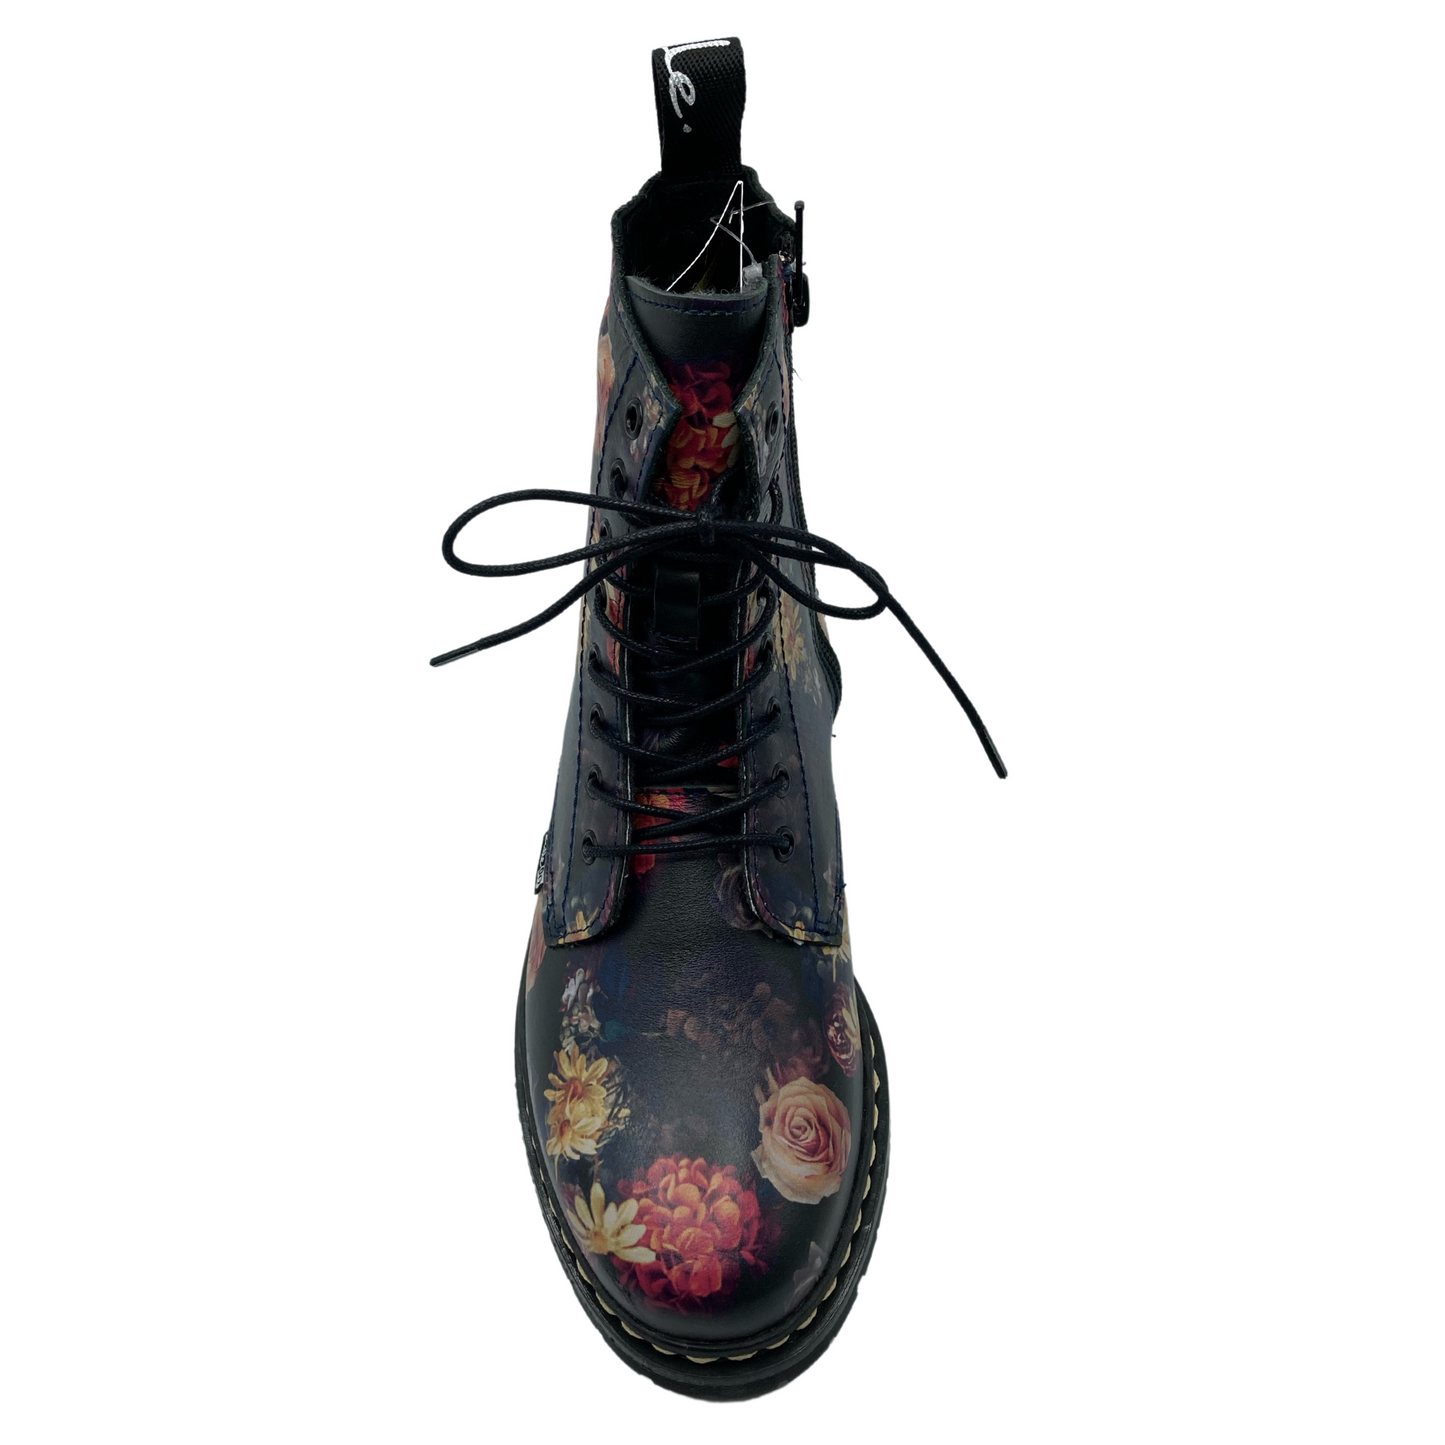 Top view of floral combat boot with lace up upper and rounded toe